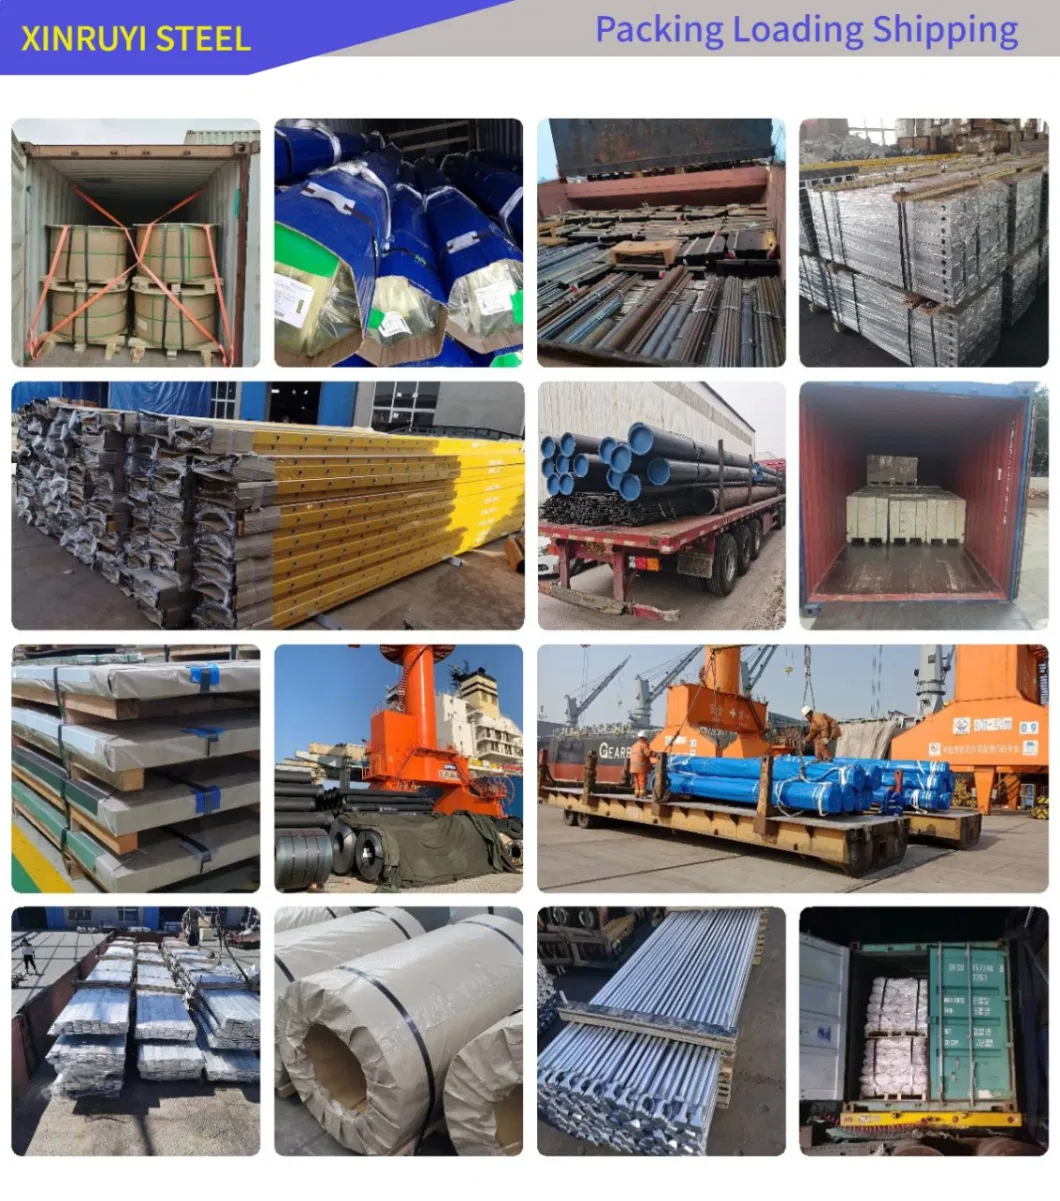 En10210 S355j0h S355j2h Hot Rolling Seamless Carbon Structural Service Steel Pipes for Hydraulic Cylinder and Lifting Jacks